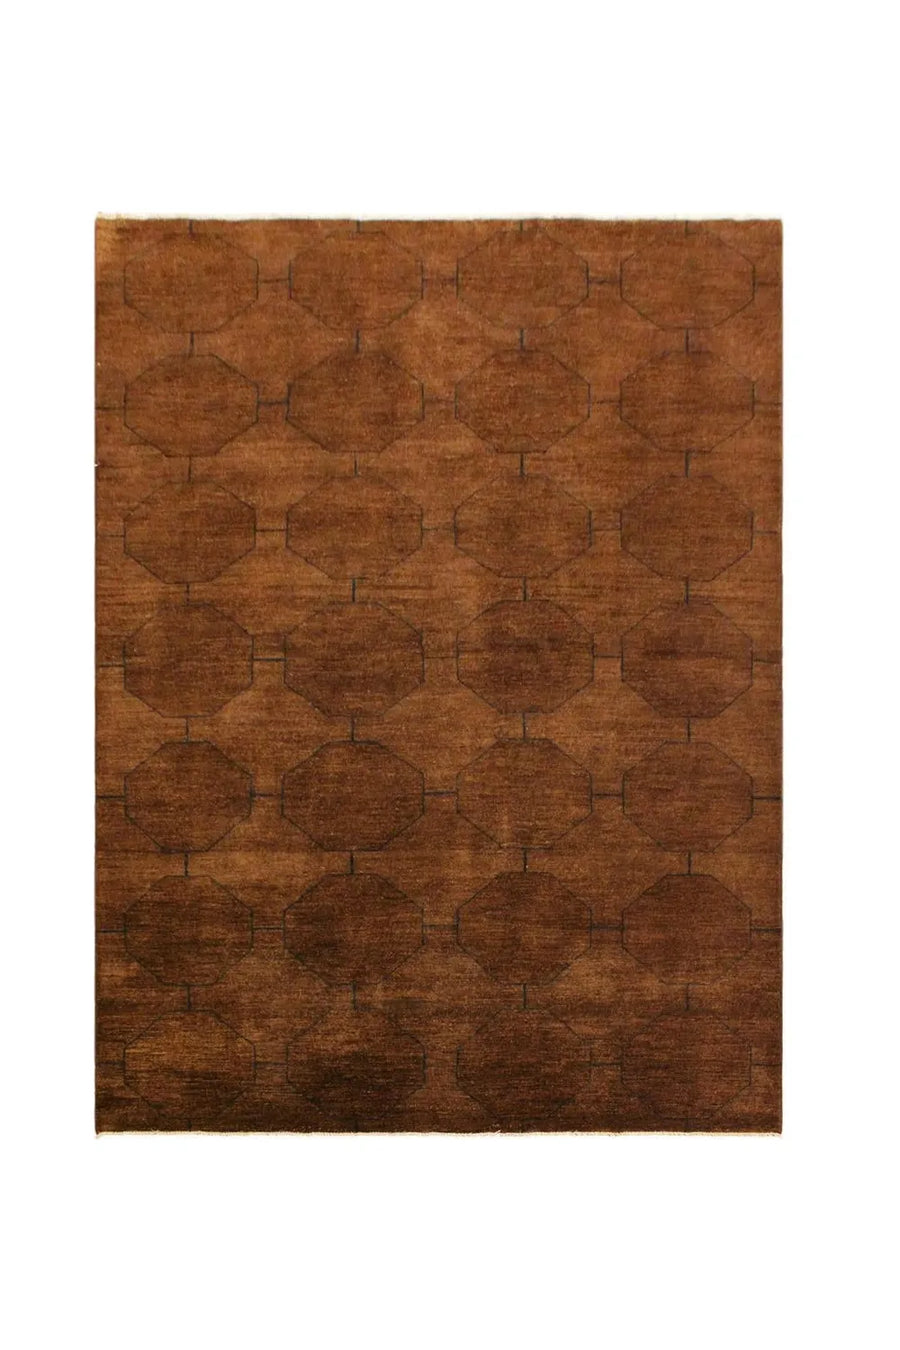 Modern Overdyed Brown Geometric Wool Rug in a Cozy 6x8 Size